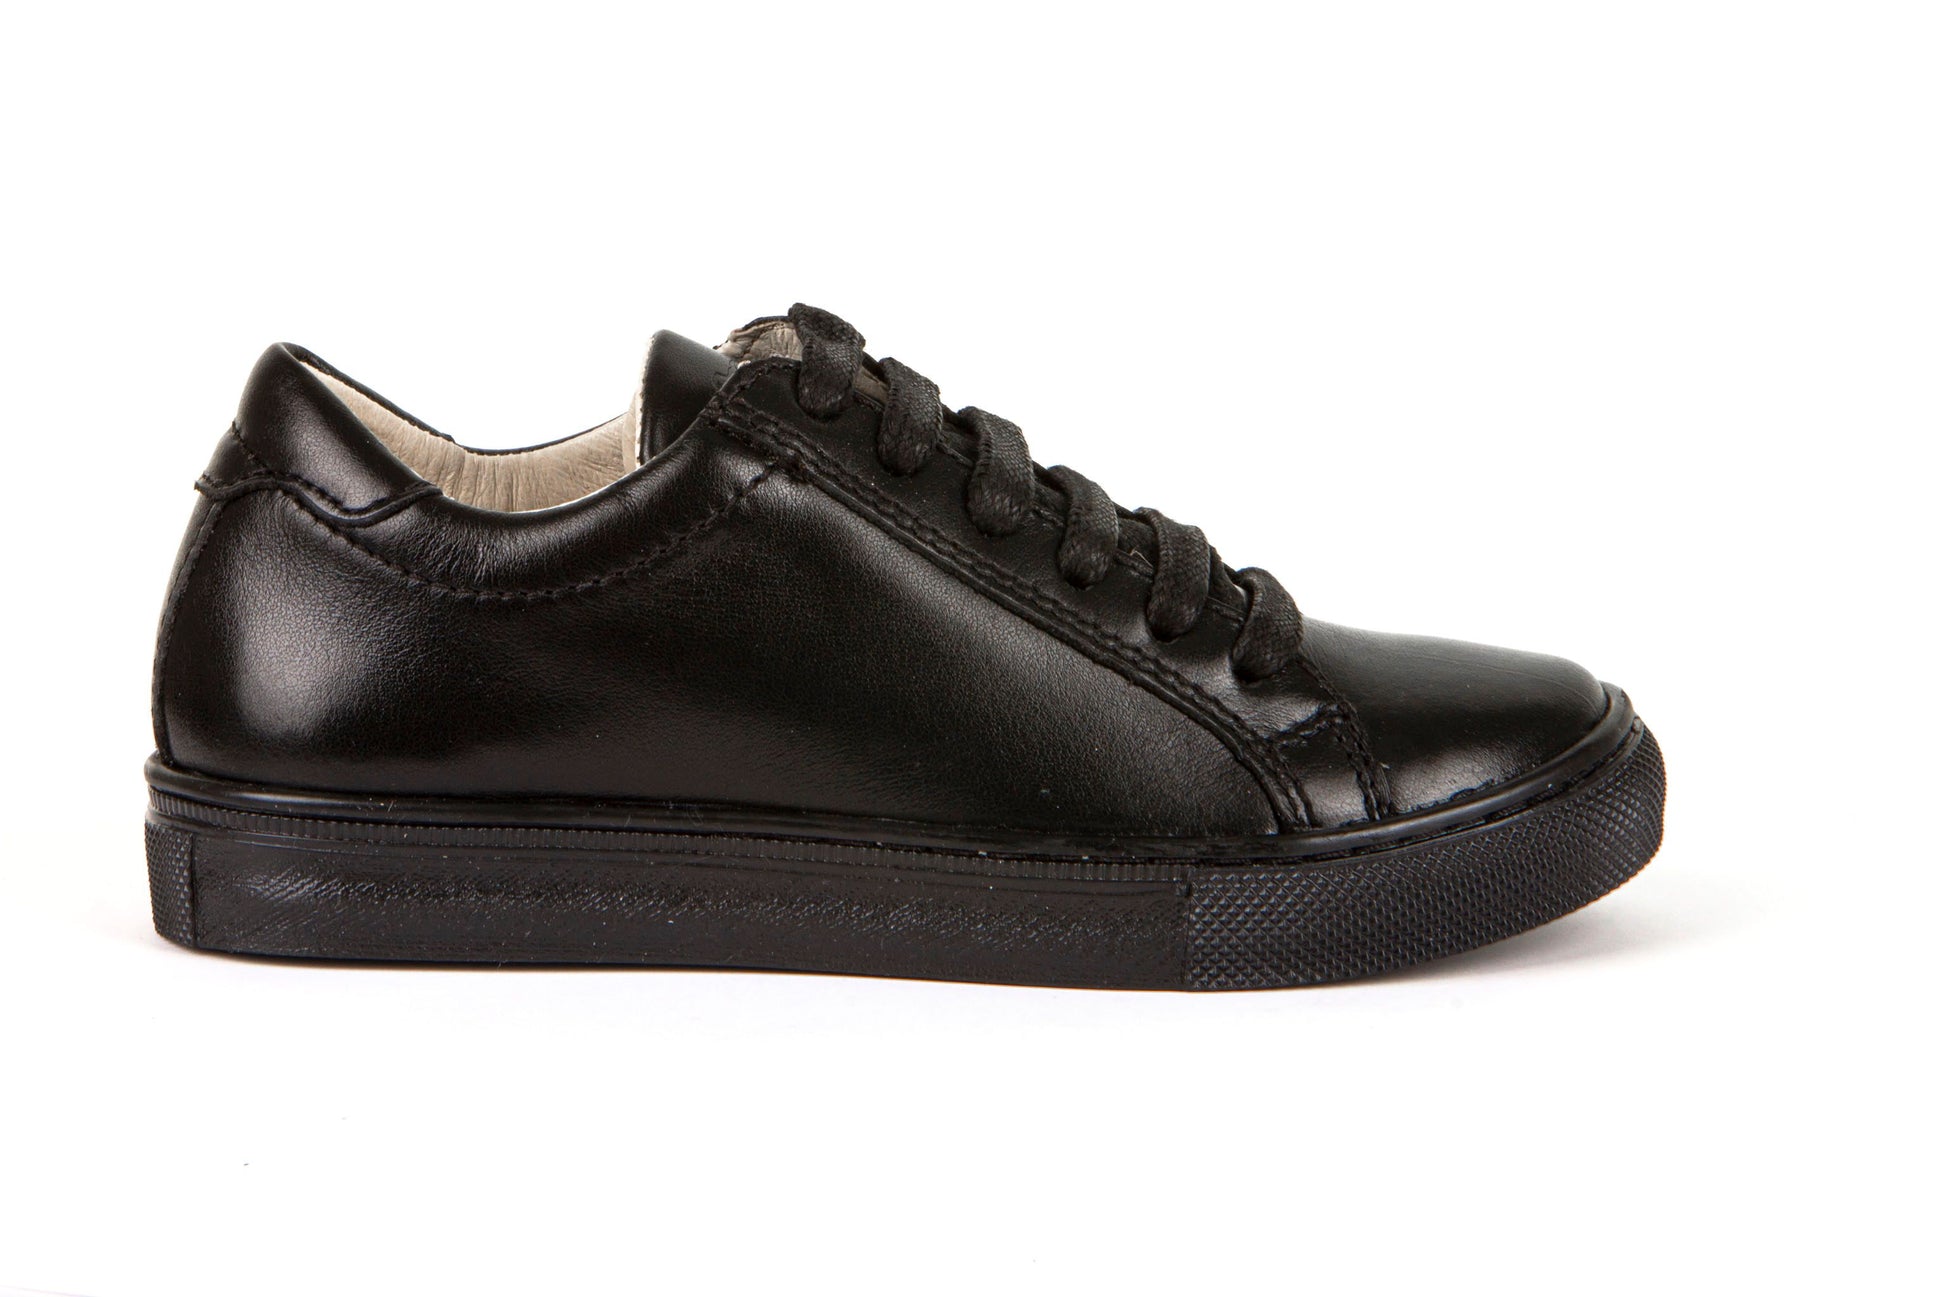 A boys casual lace up school shoe by Froddo, style Morgan L, in black leather with lace up fastening. Right side view.